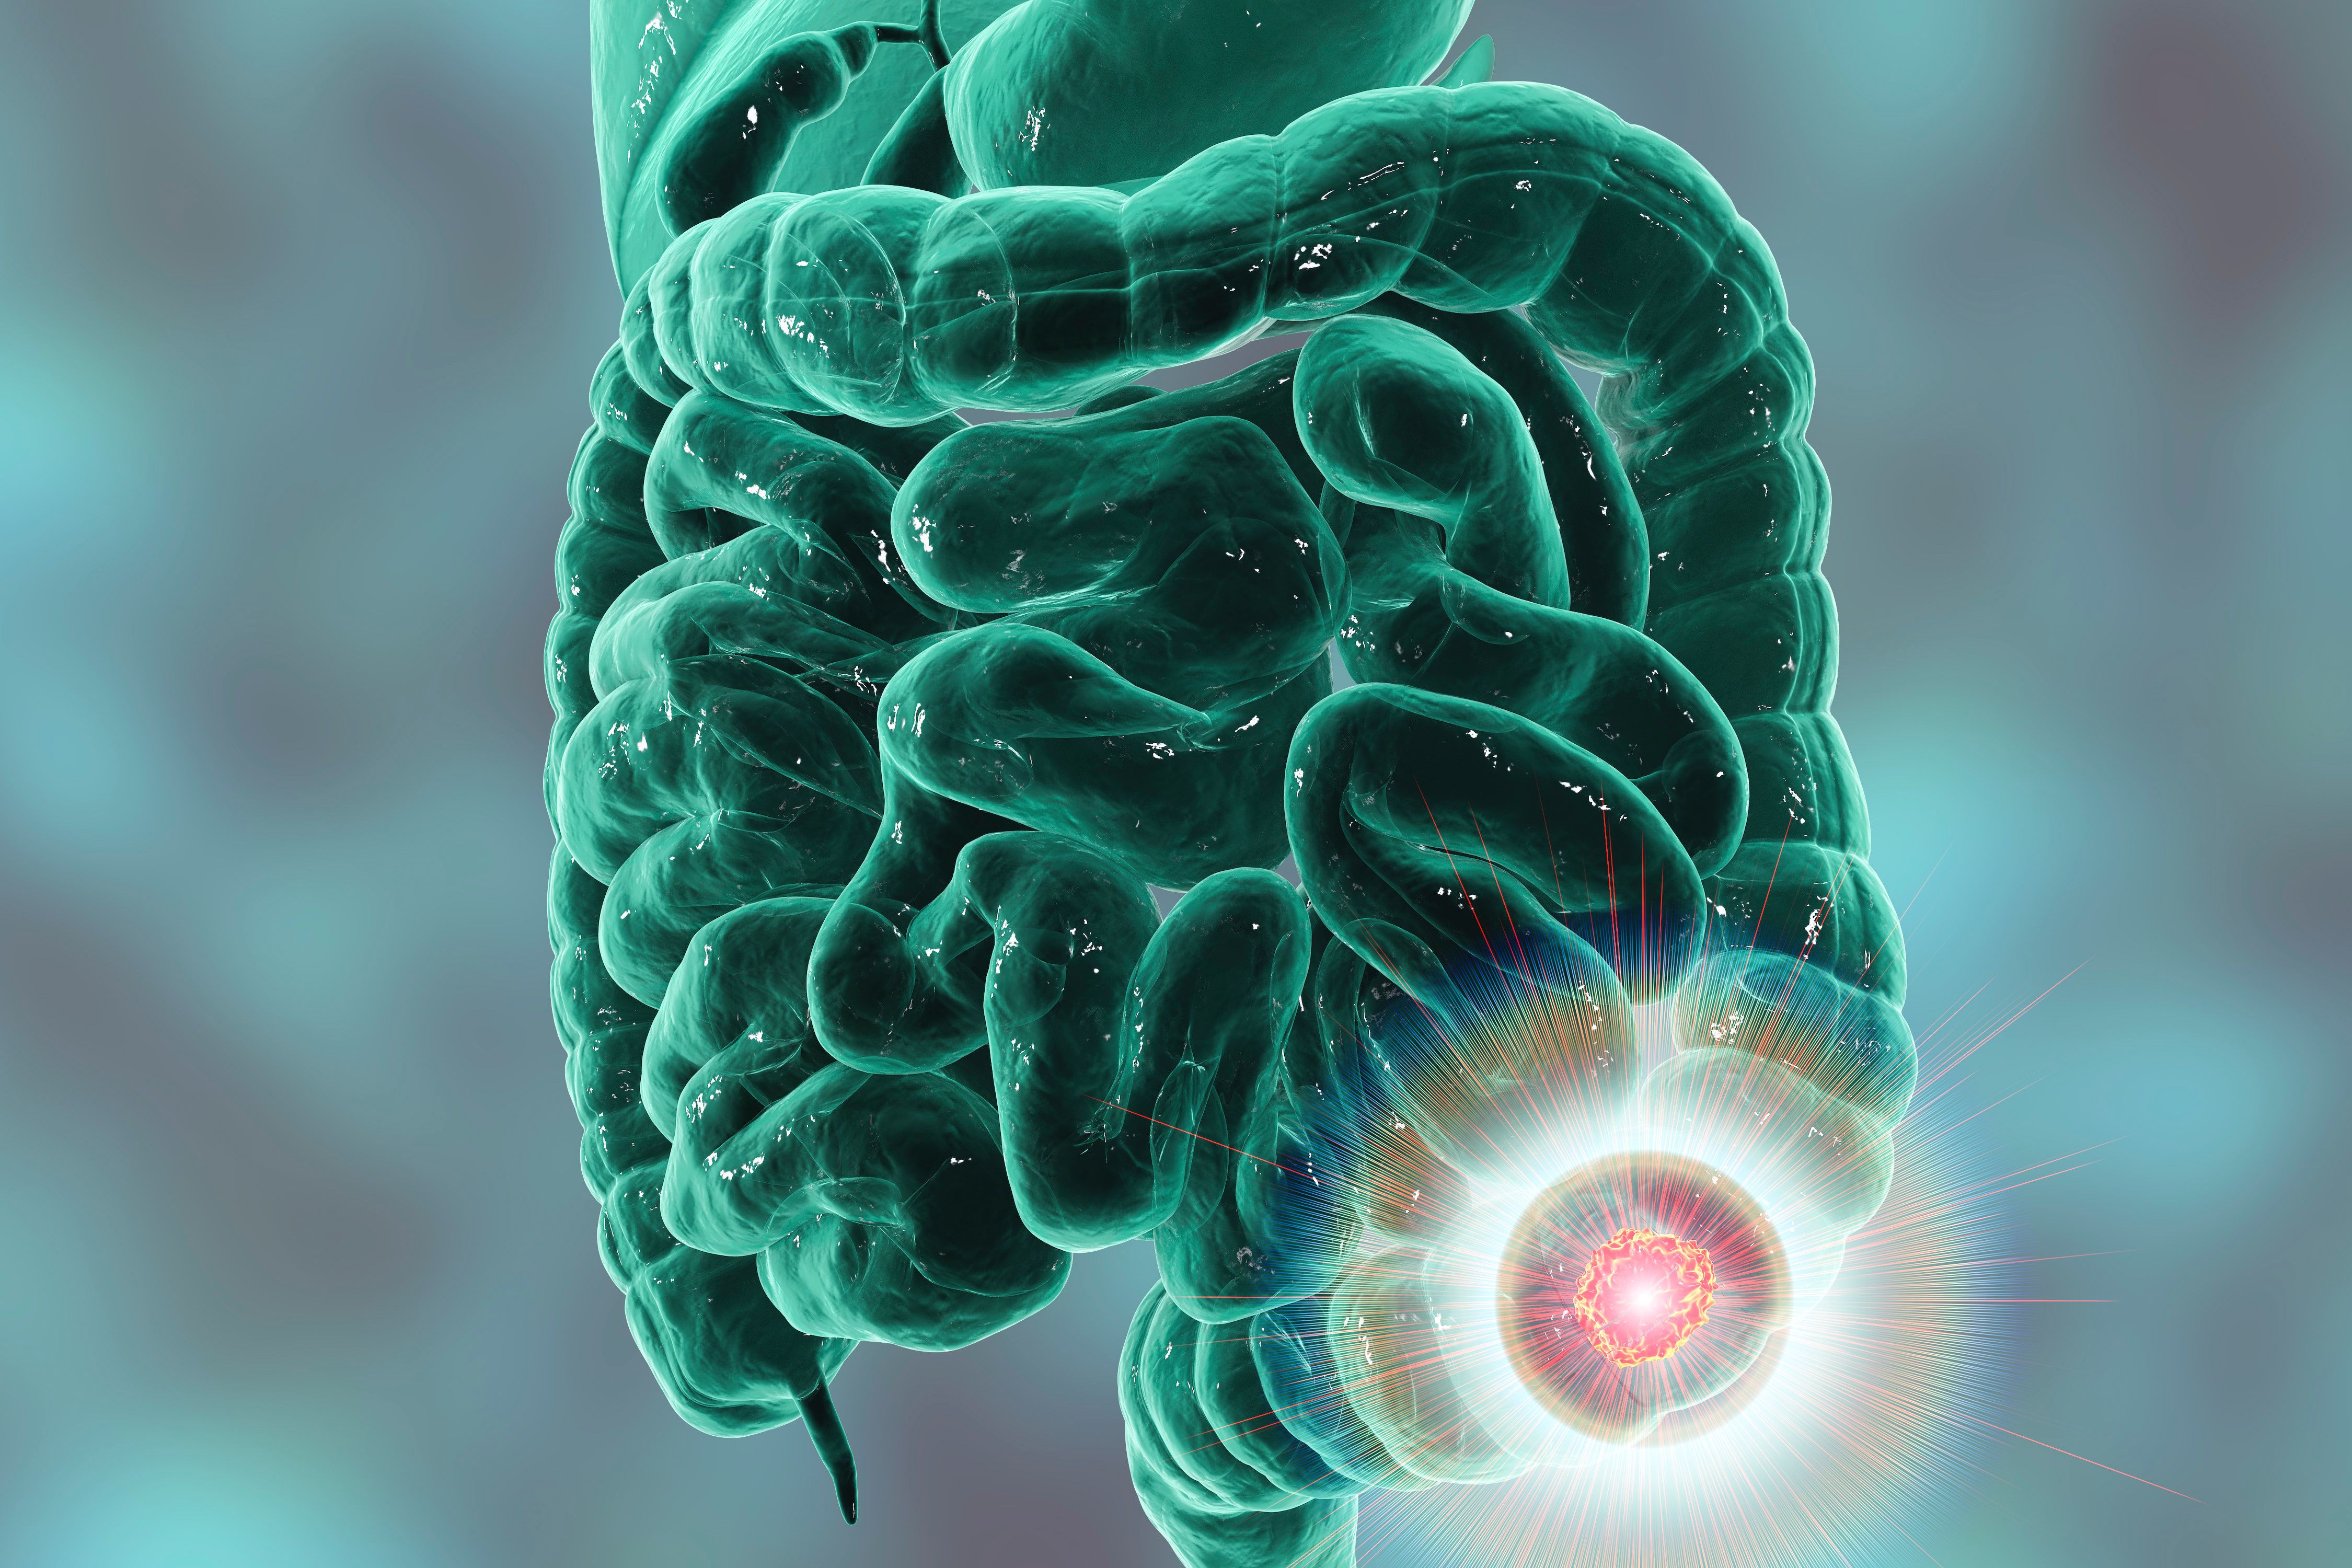 Patients With Complicated Diabetes, Colorectal Cancer May Have Significant Risk of Death From Any Cause - Pharmacy Times